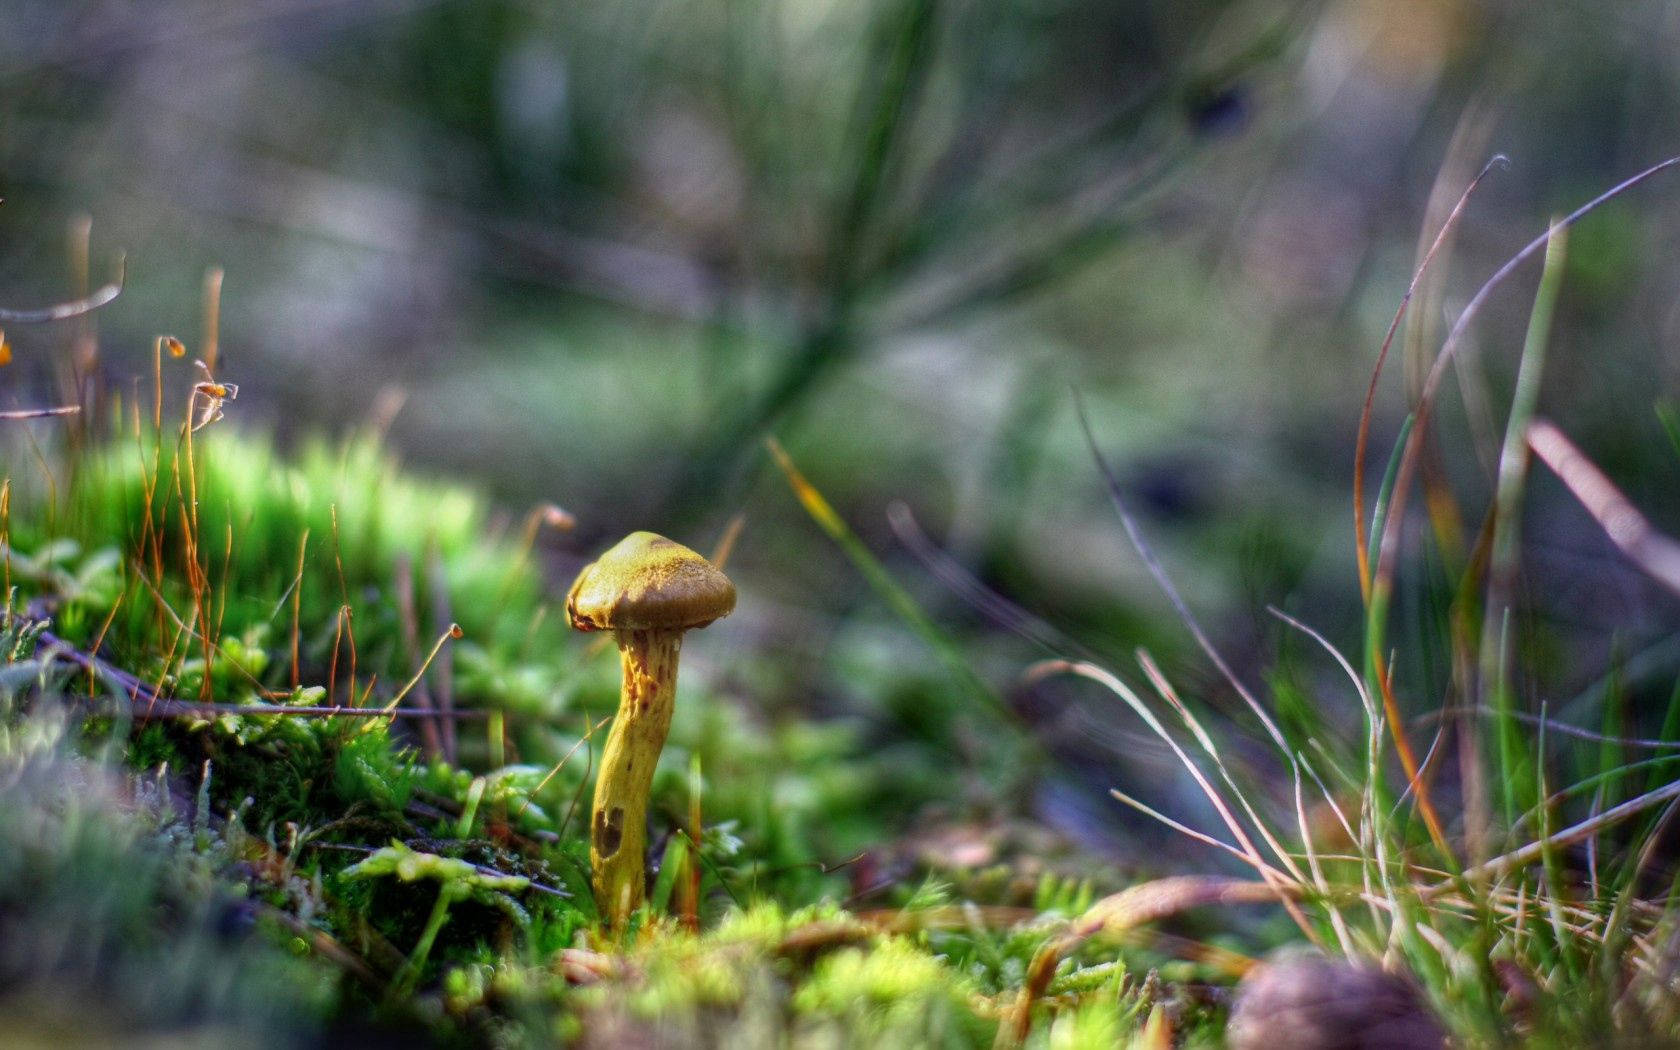 A Close-up Look Of A Green Mushroom Growing Against A Patch Of Grass Background